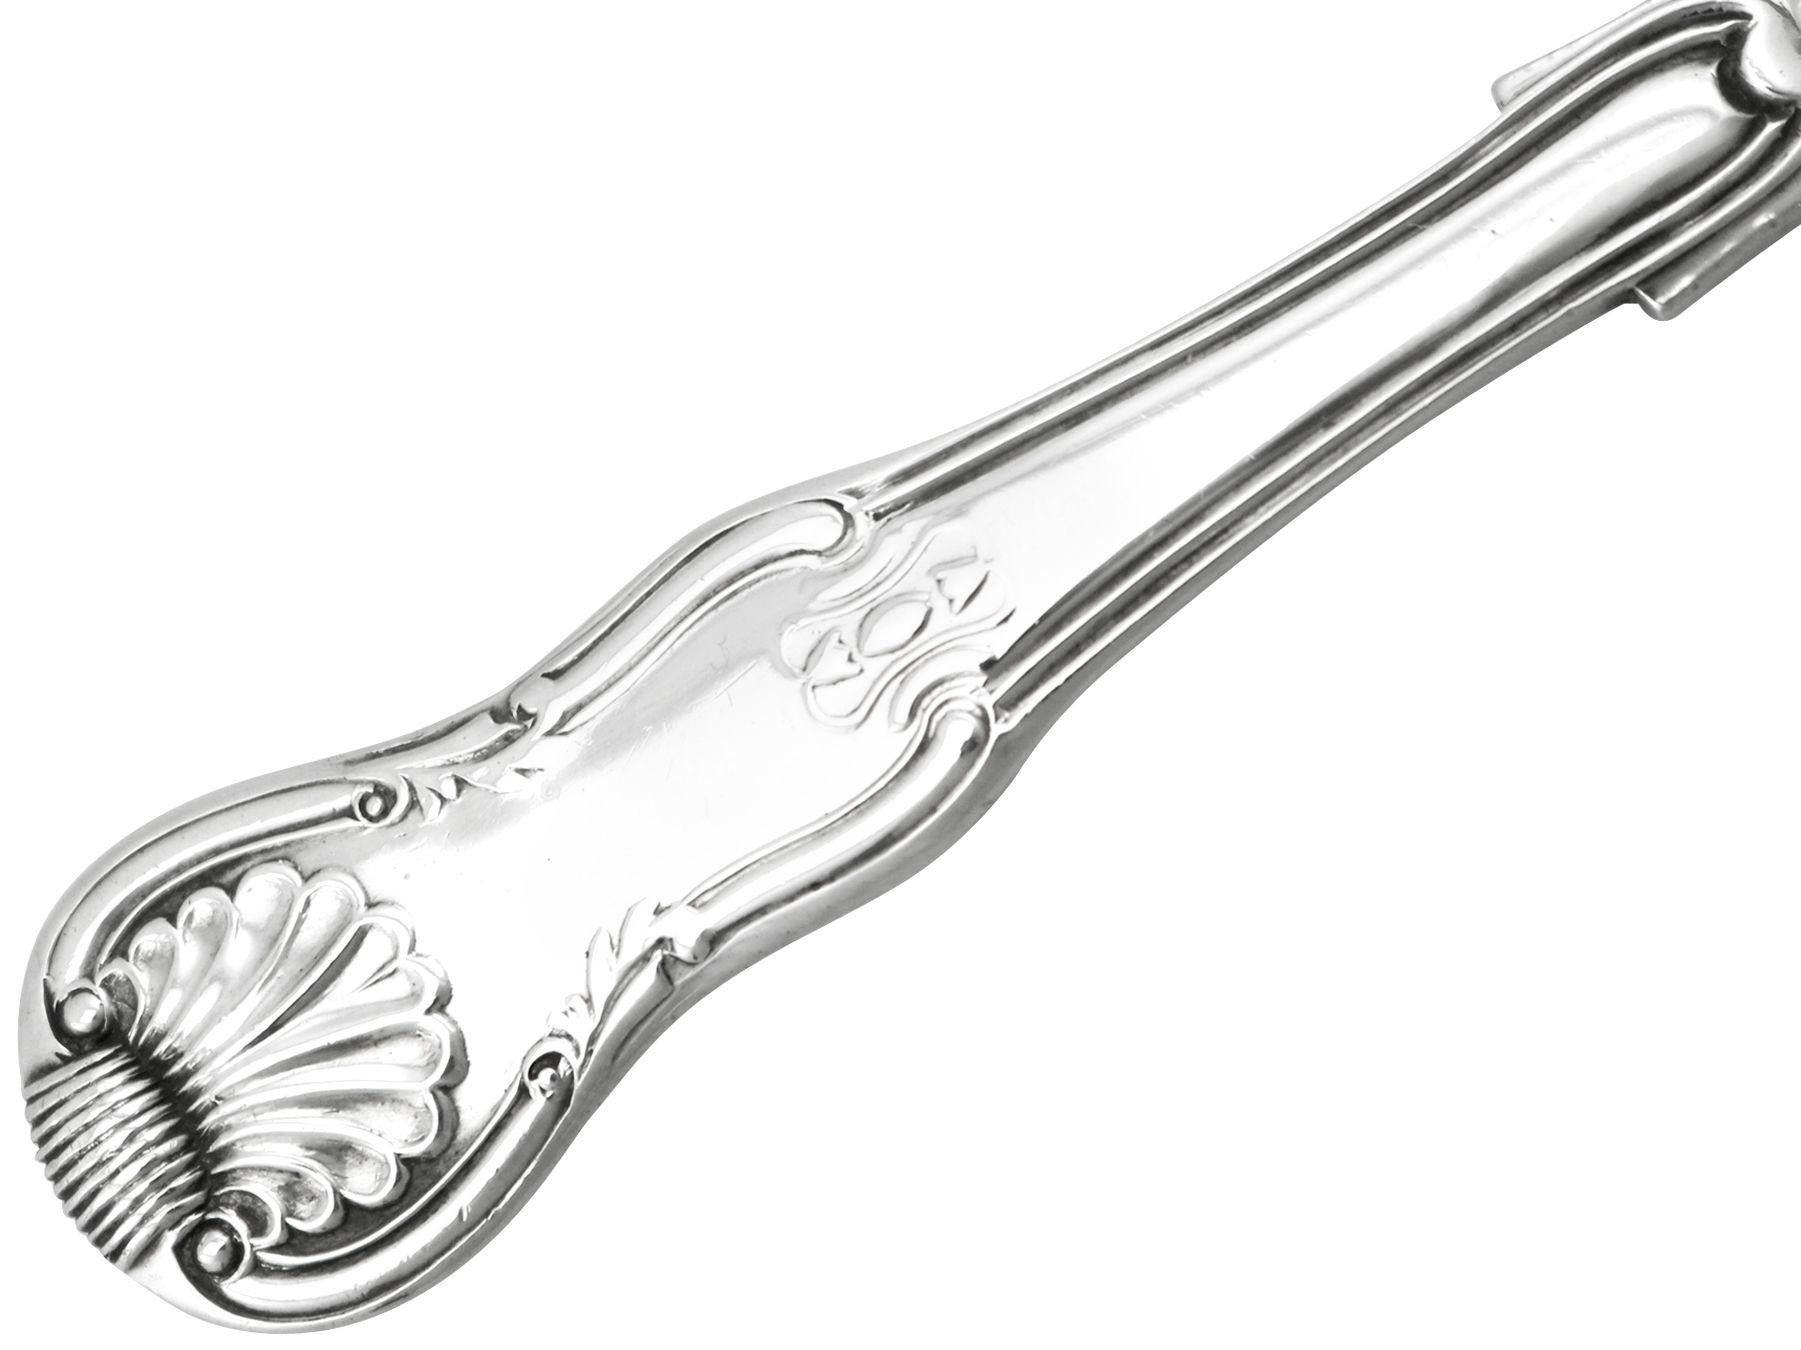 Antique Georgian English Sterling Silver Caddy Spoon In Excellent Condition For Sale In Jesmond, Newcastle Upon Tyne